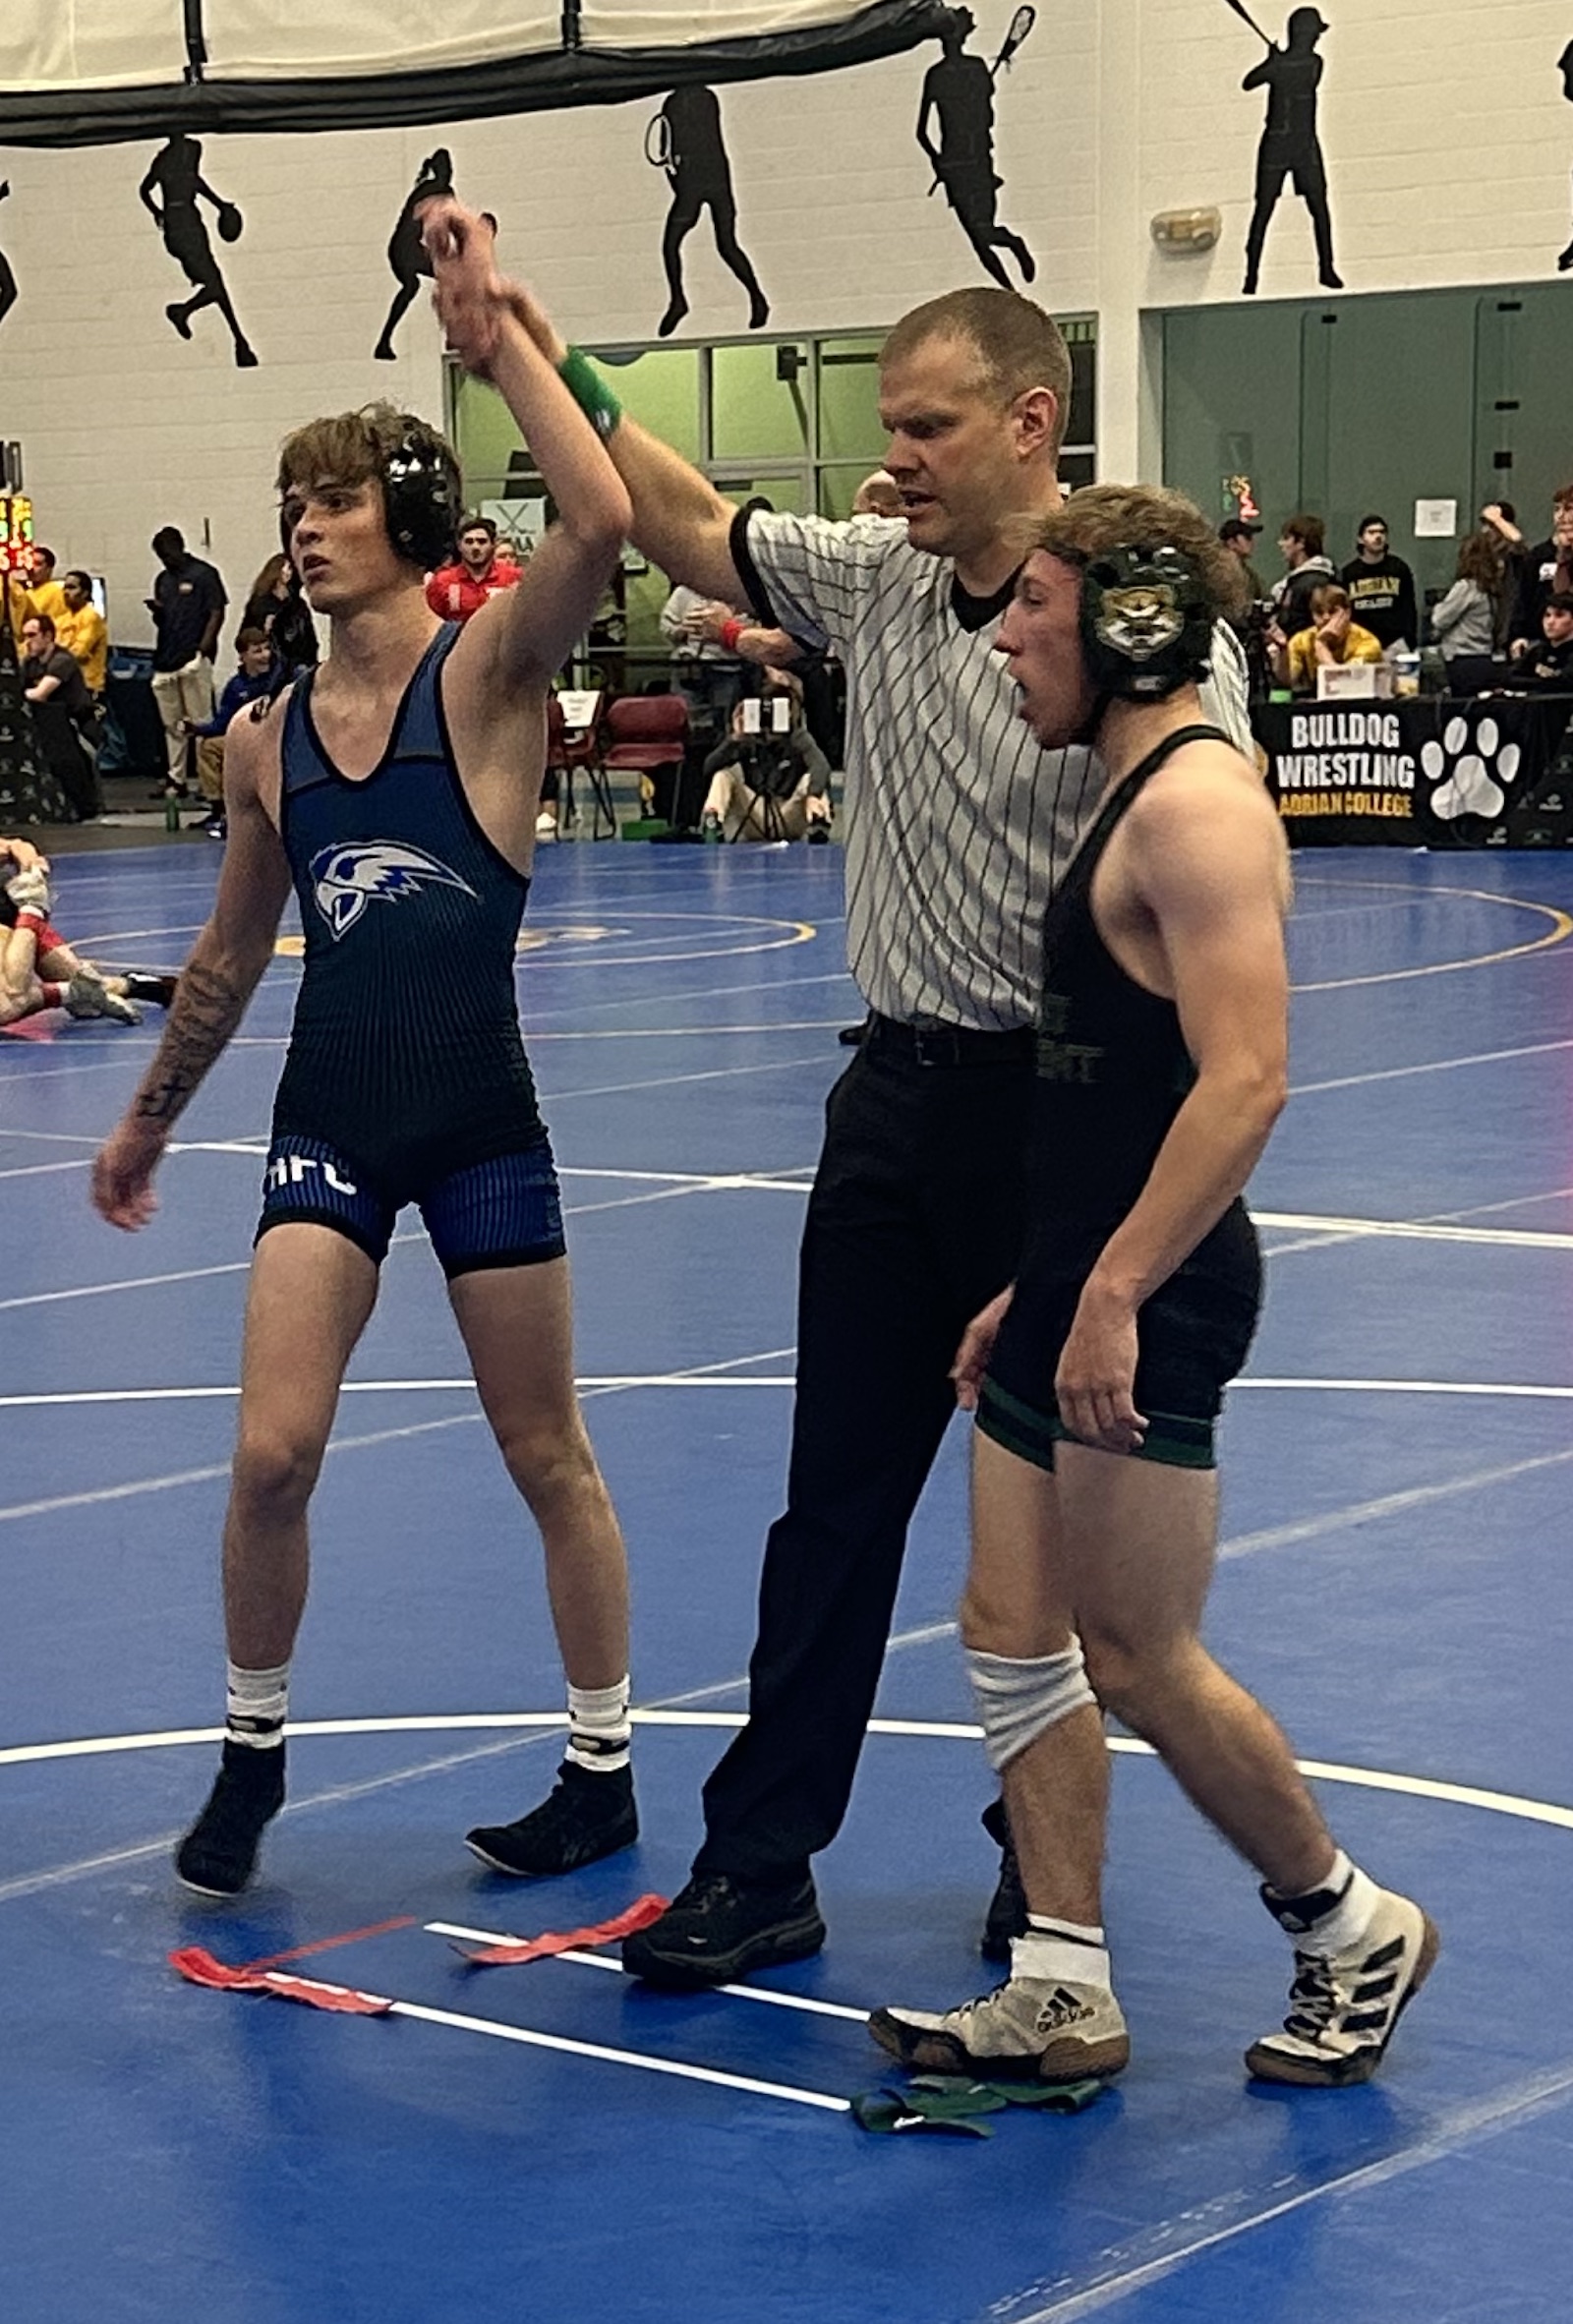 Jacob Campbell (FR) Hawks’ wrestler stands tall at Adrian Invitational after winning his match. Photo courtesy of Coach Grant Mackenzie.